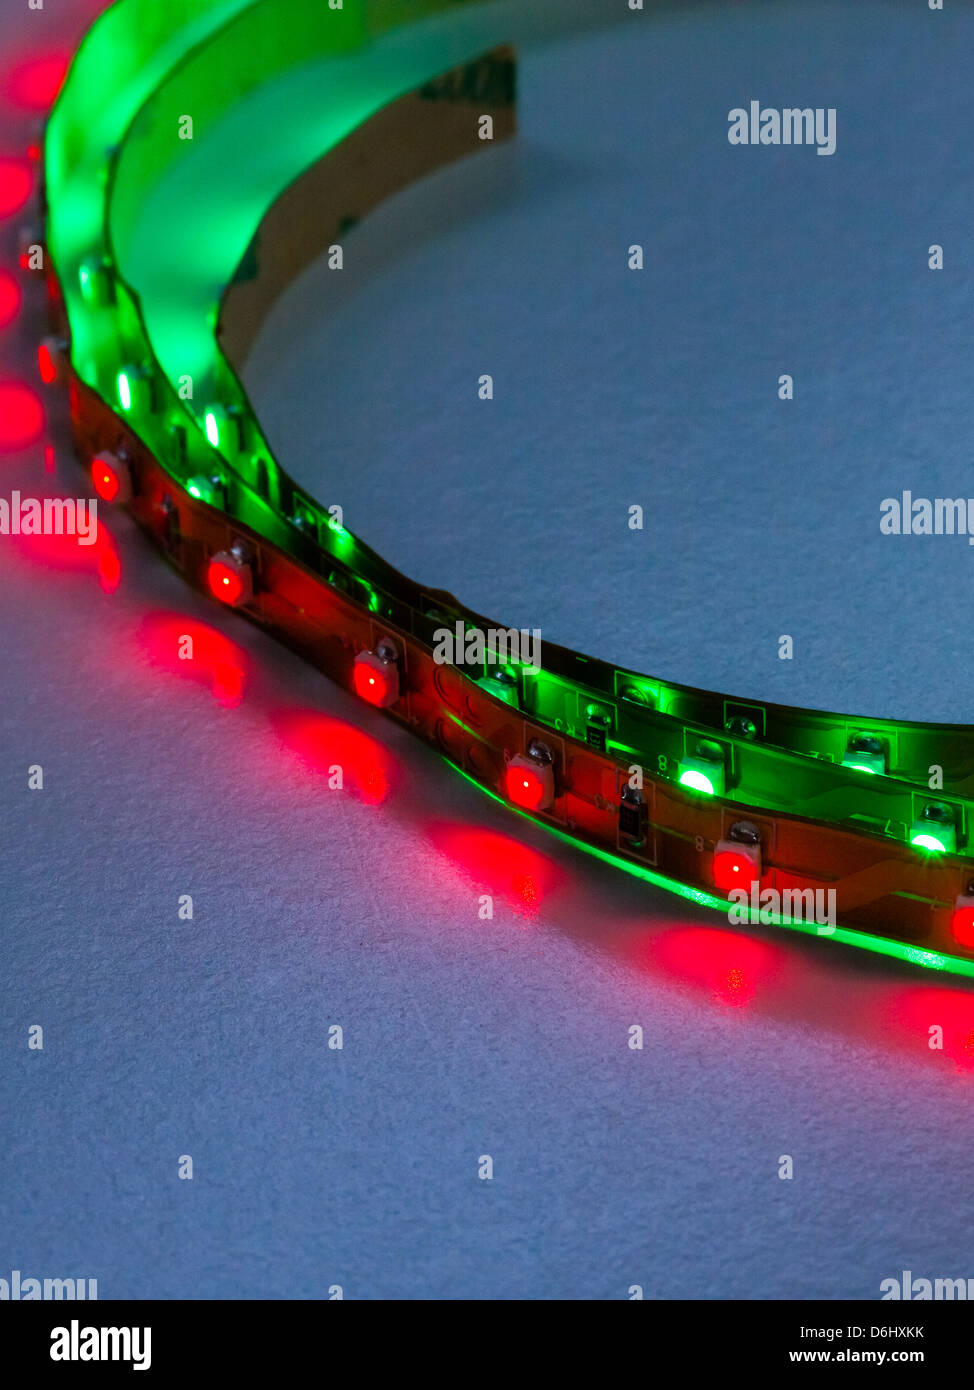 Close up of high intensity LED lighting strips illuminated with very narrow depth of field. Printed circuitry clearly seen. Stock Photo